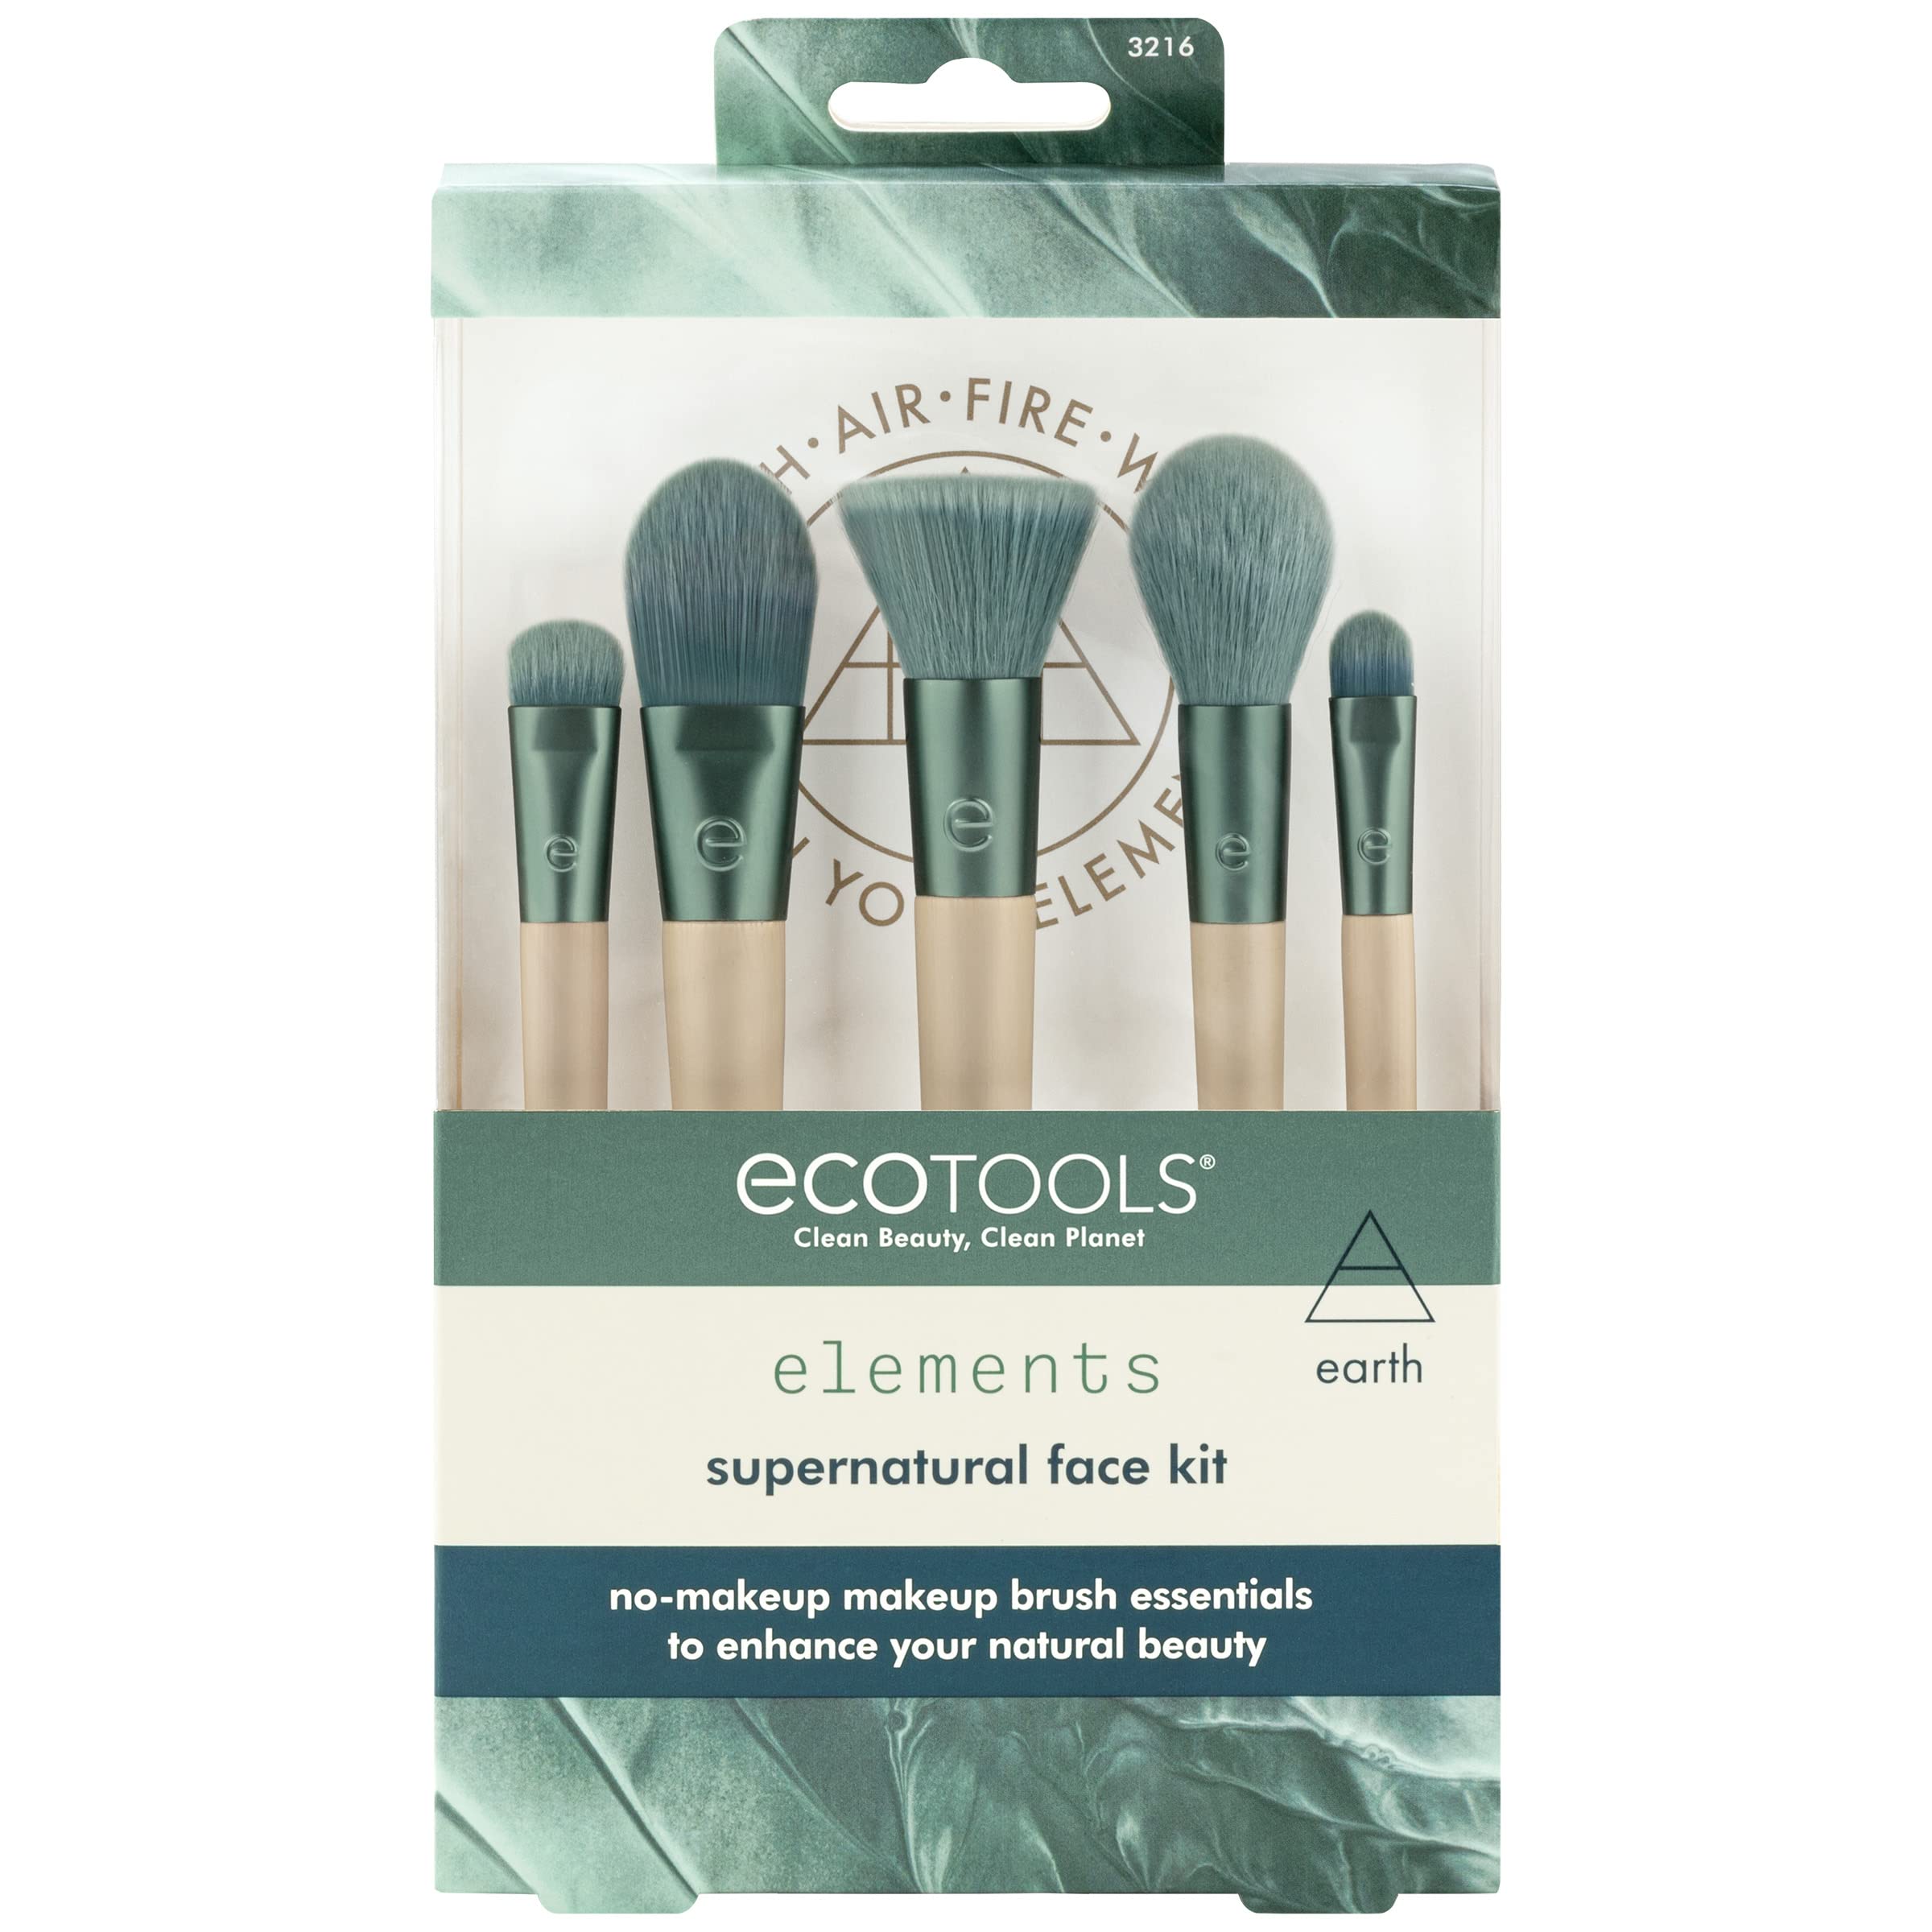 EcoTools Elements Super-Natural Face Makeup Brush Kit, For Foundation, Bronzer, Blush, & Eye Makeup, Works Best With Liquid, Cream, & Powder Products, Limited Edition, 5 Piece Set